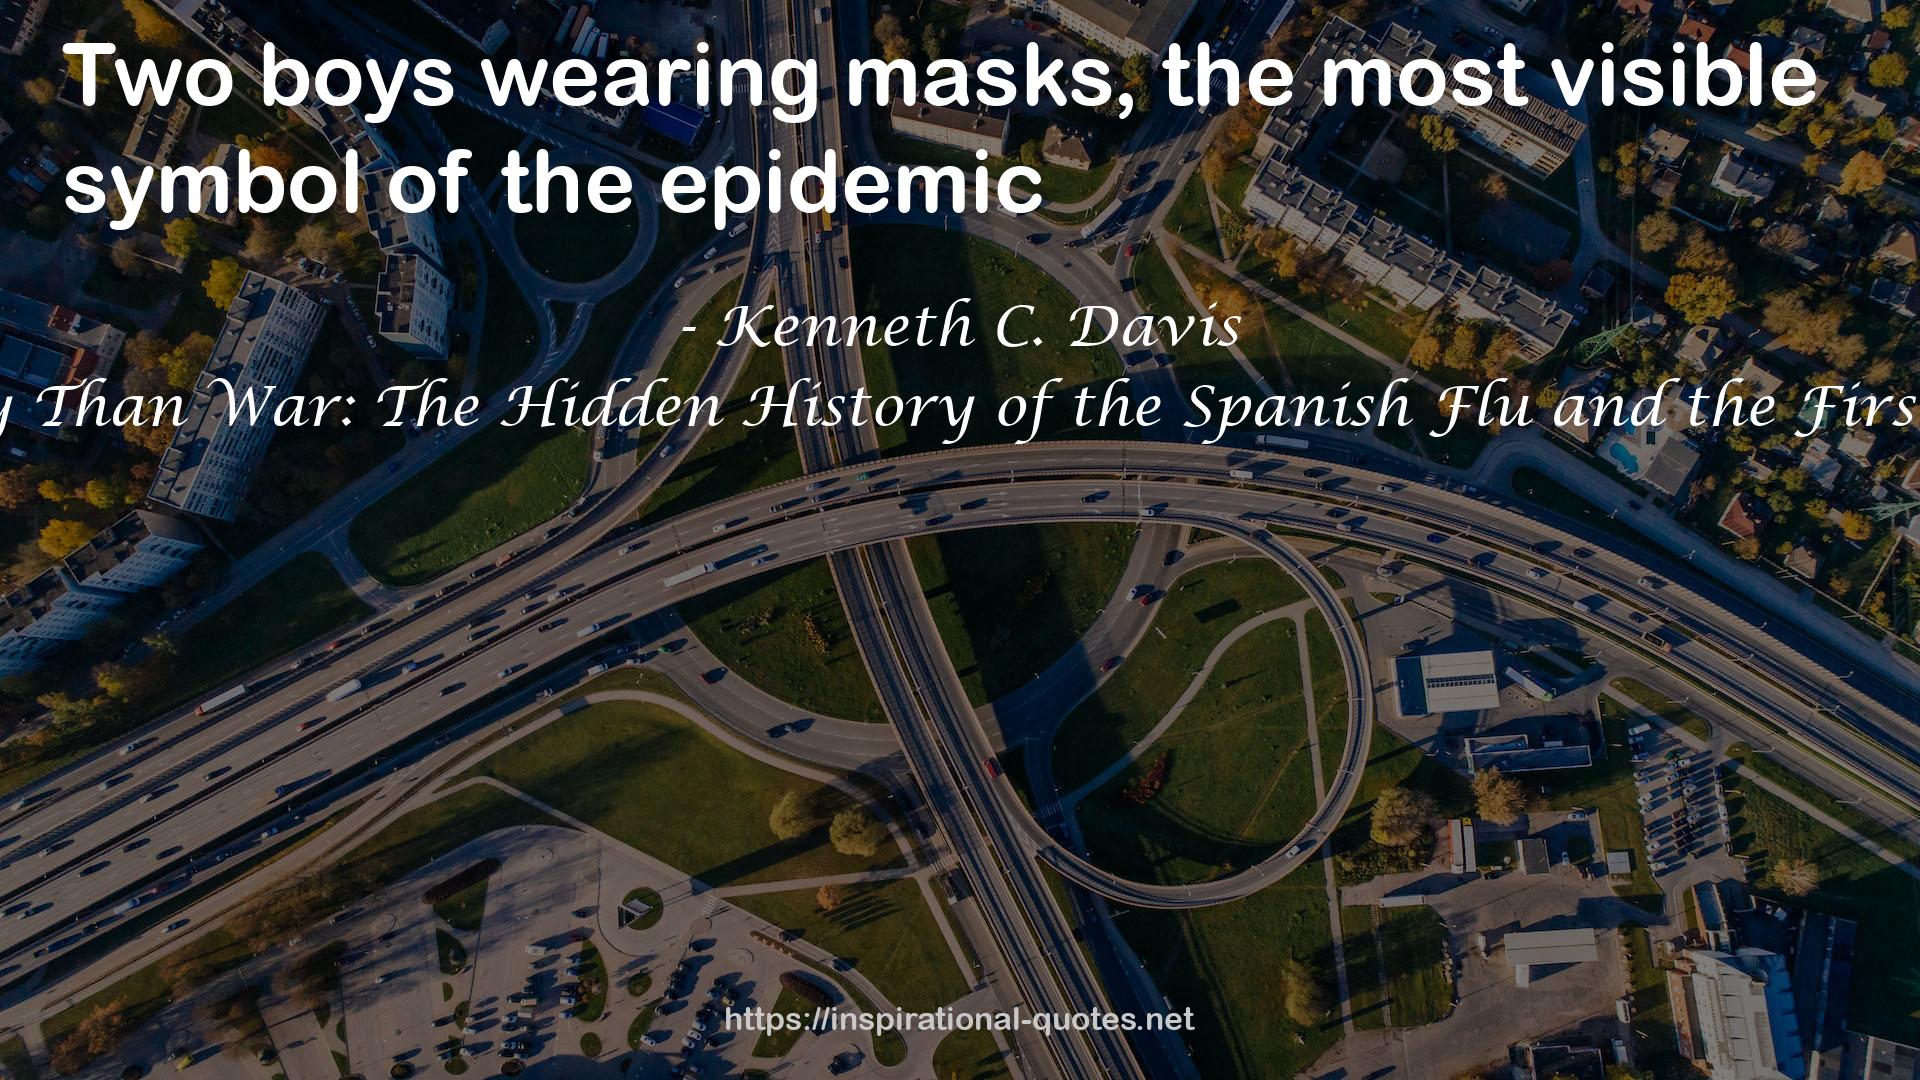 More Deadly Than War: The Hidden History of the Spanish Flu and the First World War QUOTES